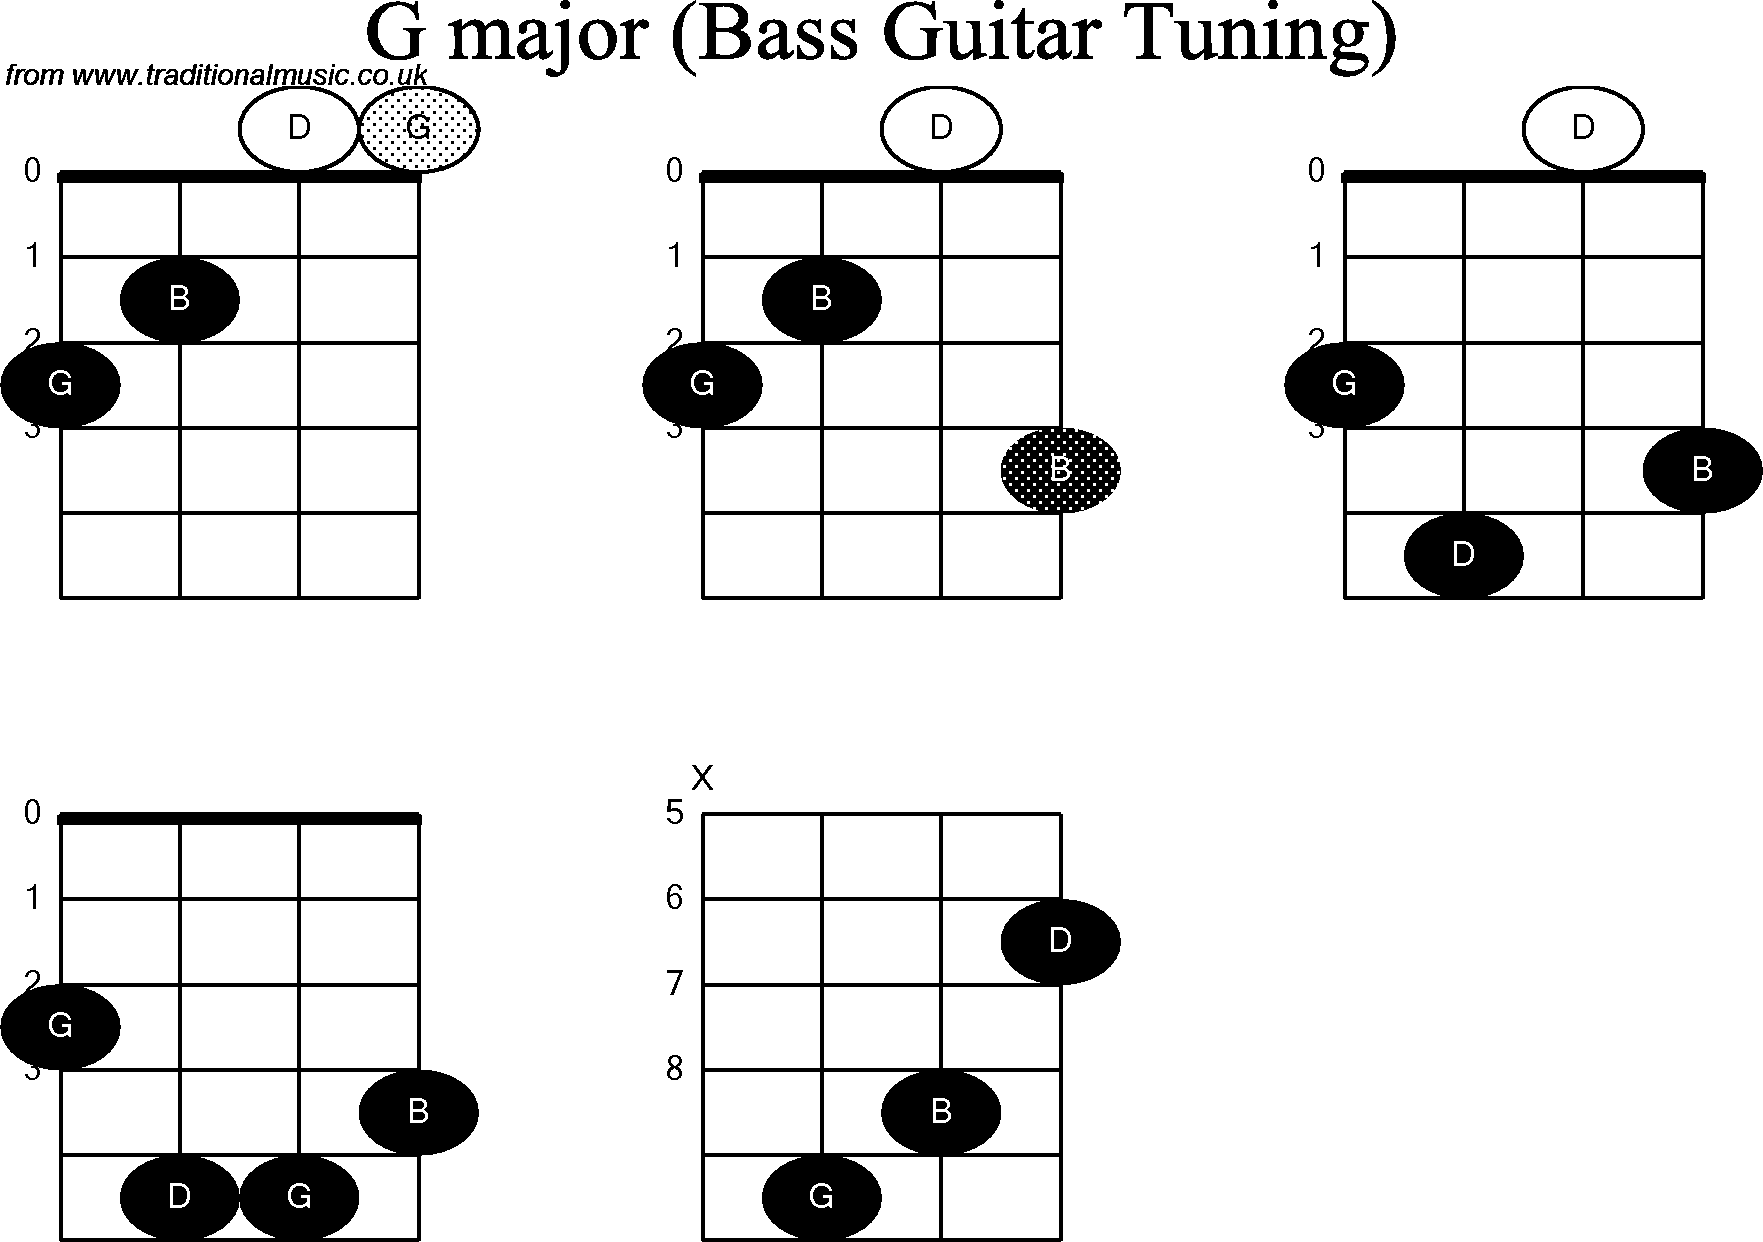 Bass Guitar chord charts for: G